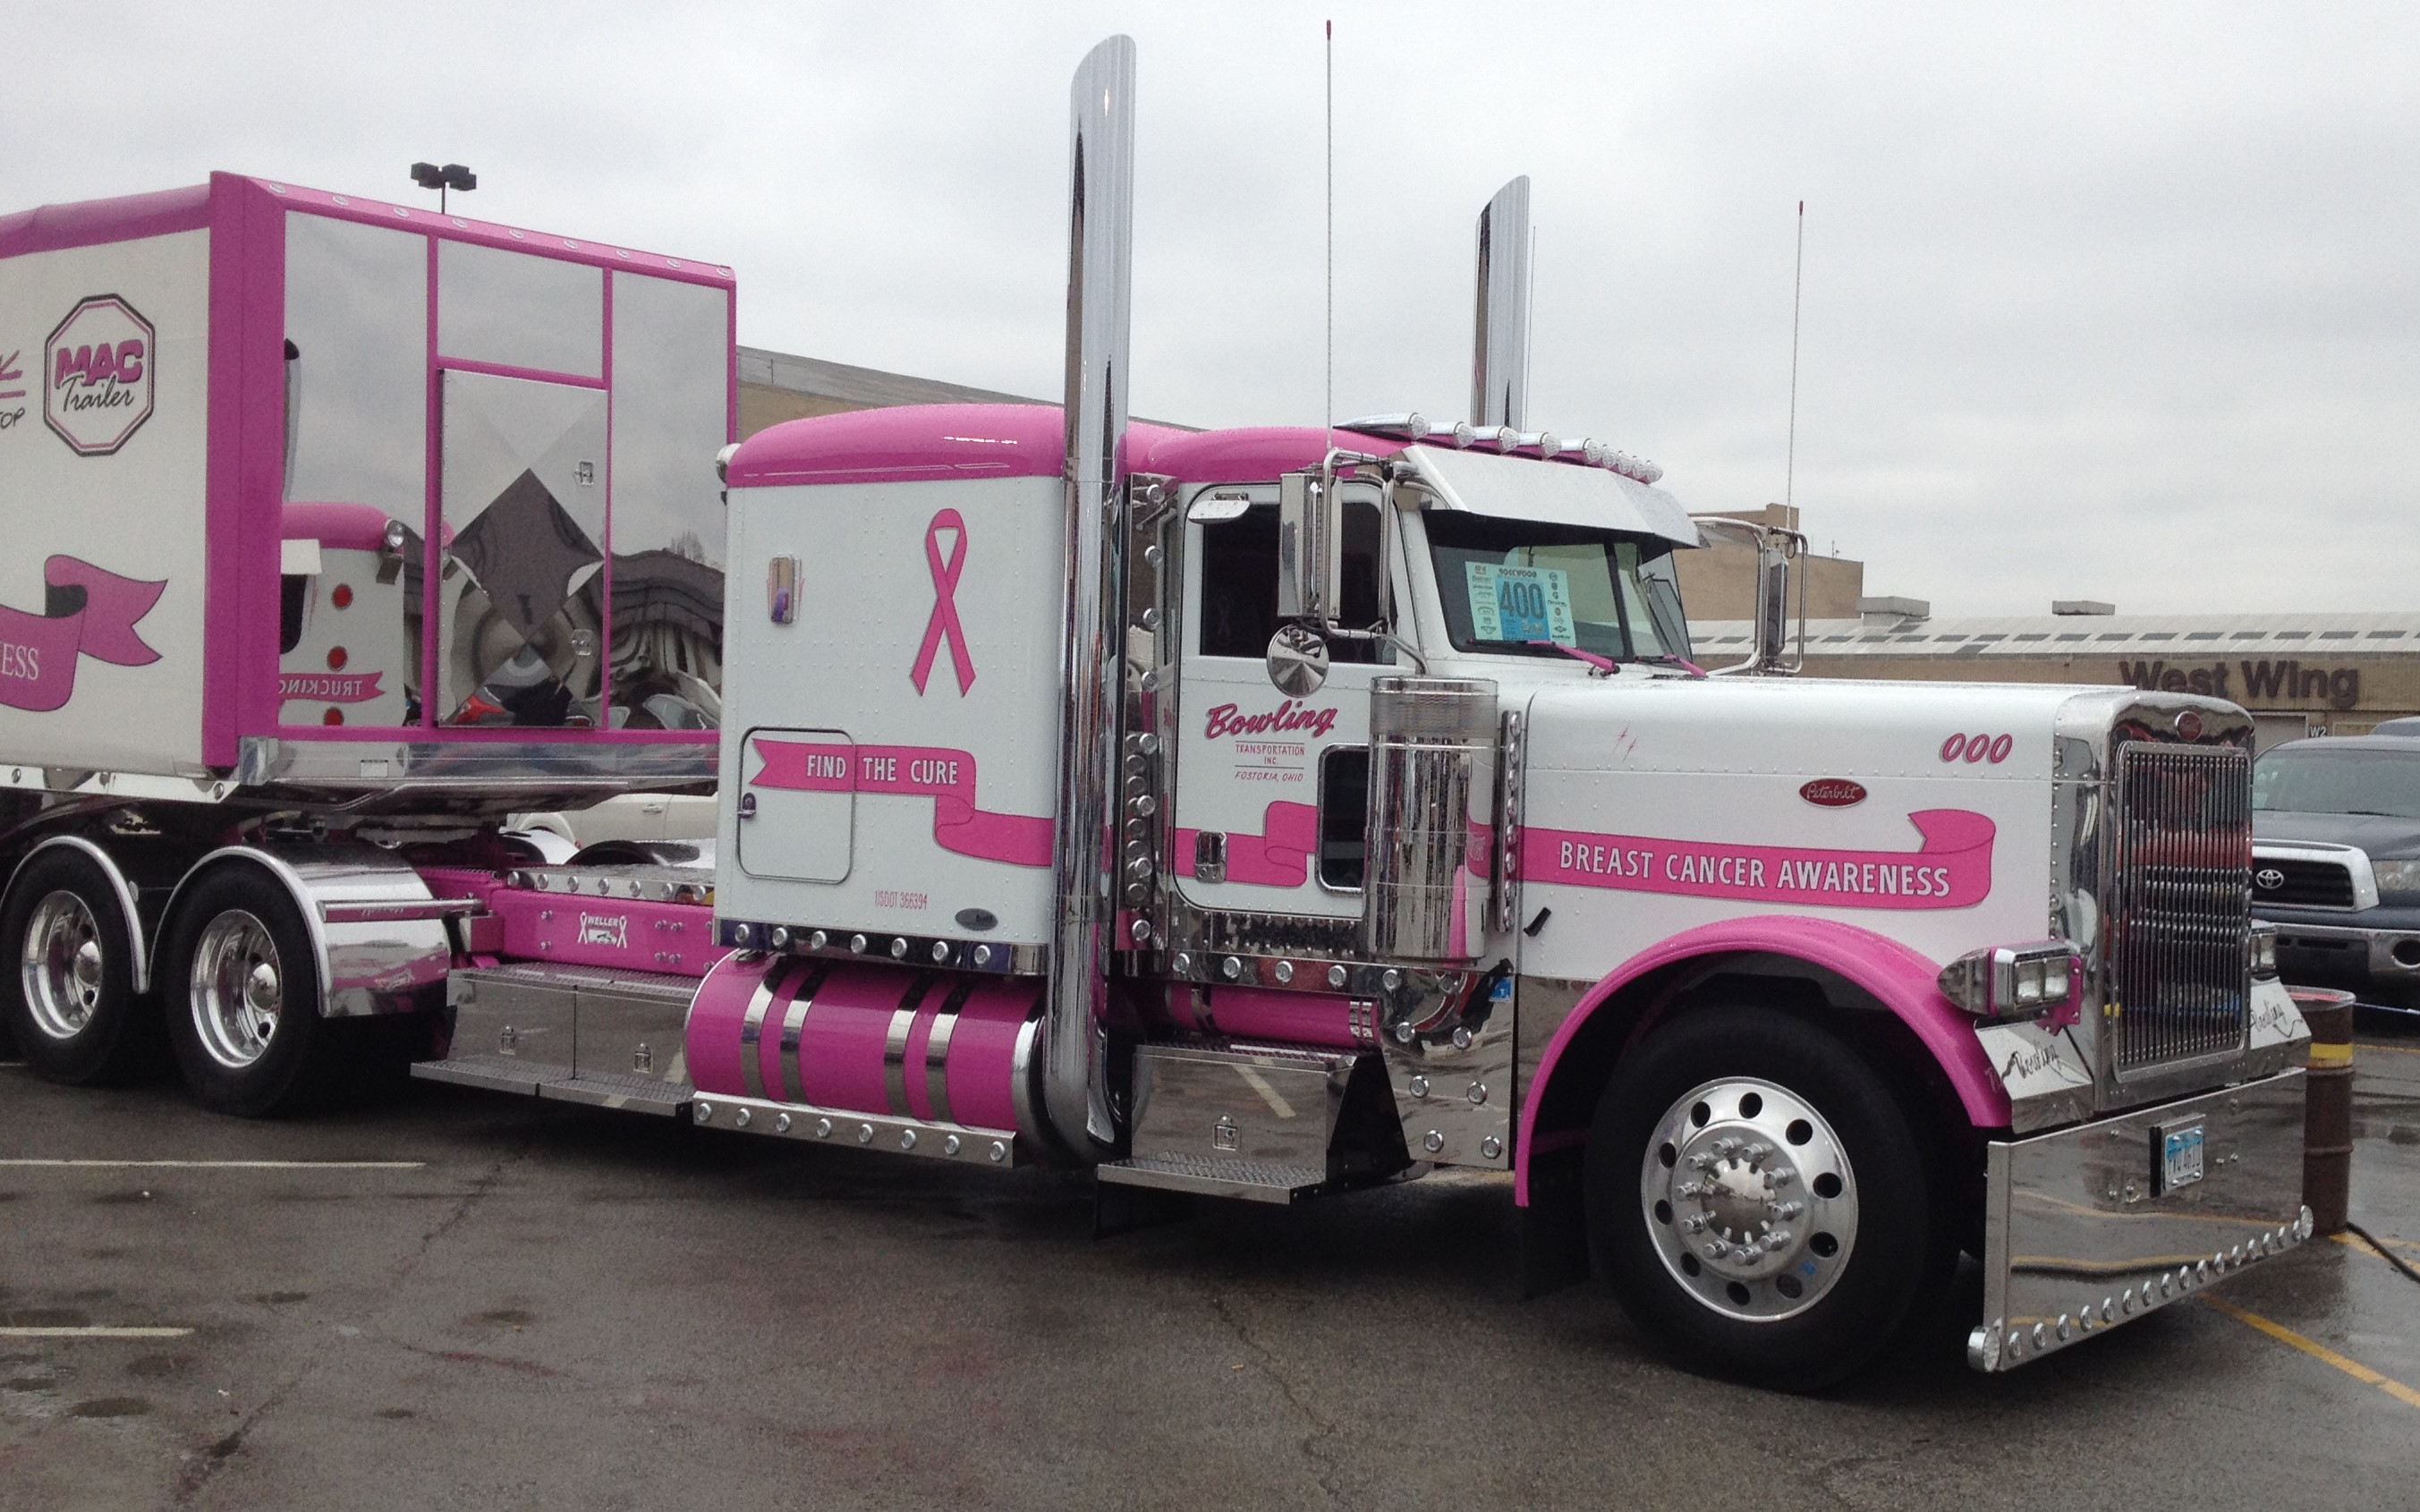 Trucks & truckers dedicated to a cause